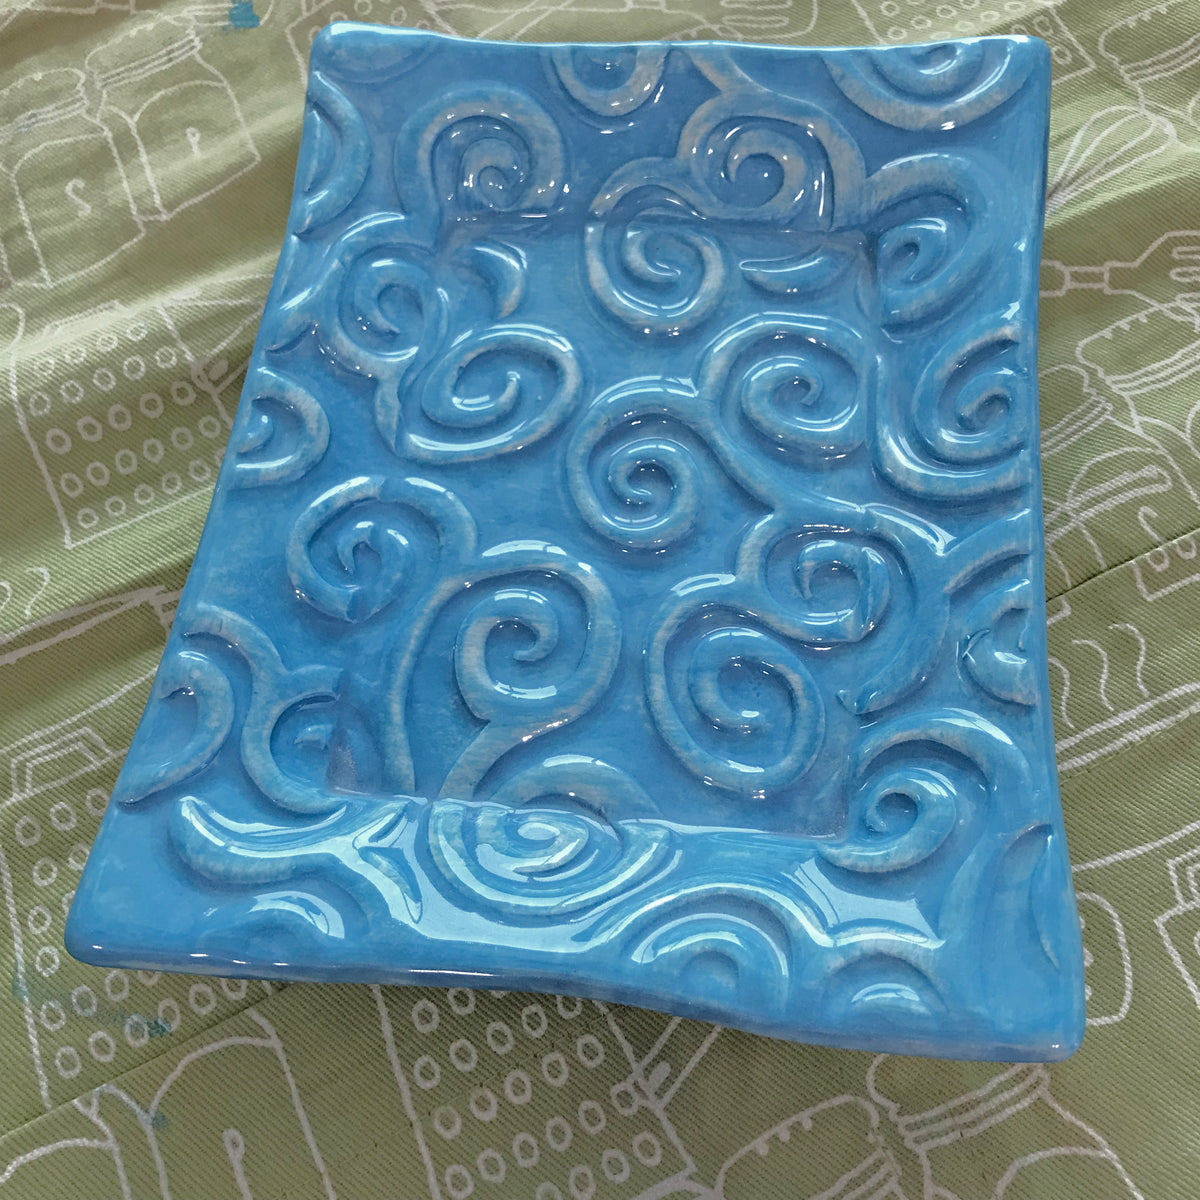 Spiral Pattern On Handcrafted Tray Created From Earthenware Clay. 